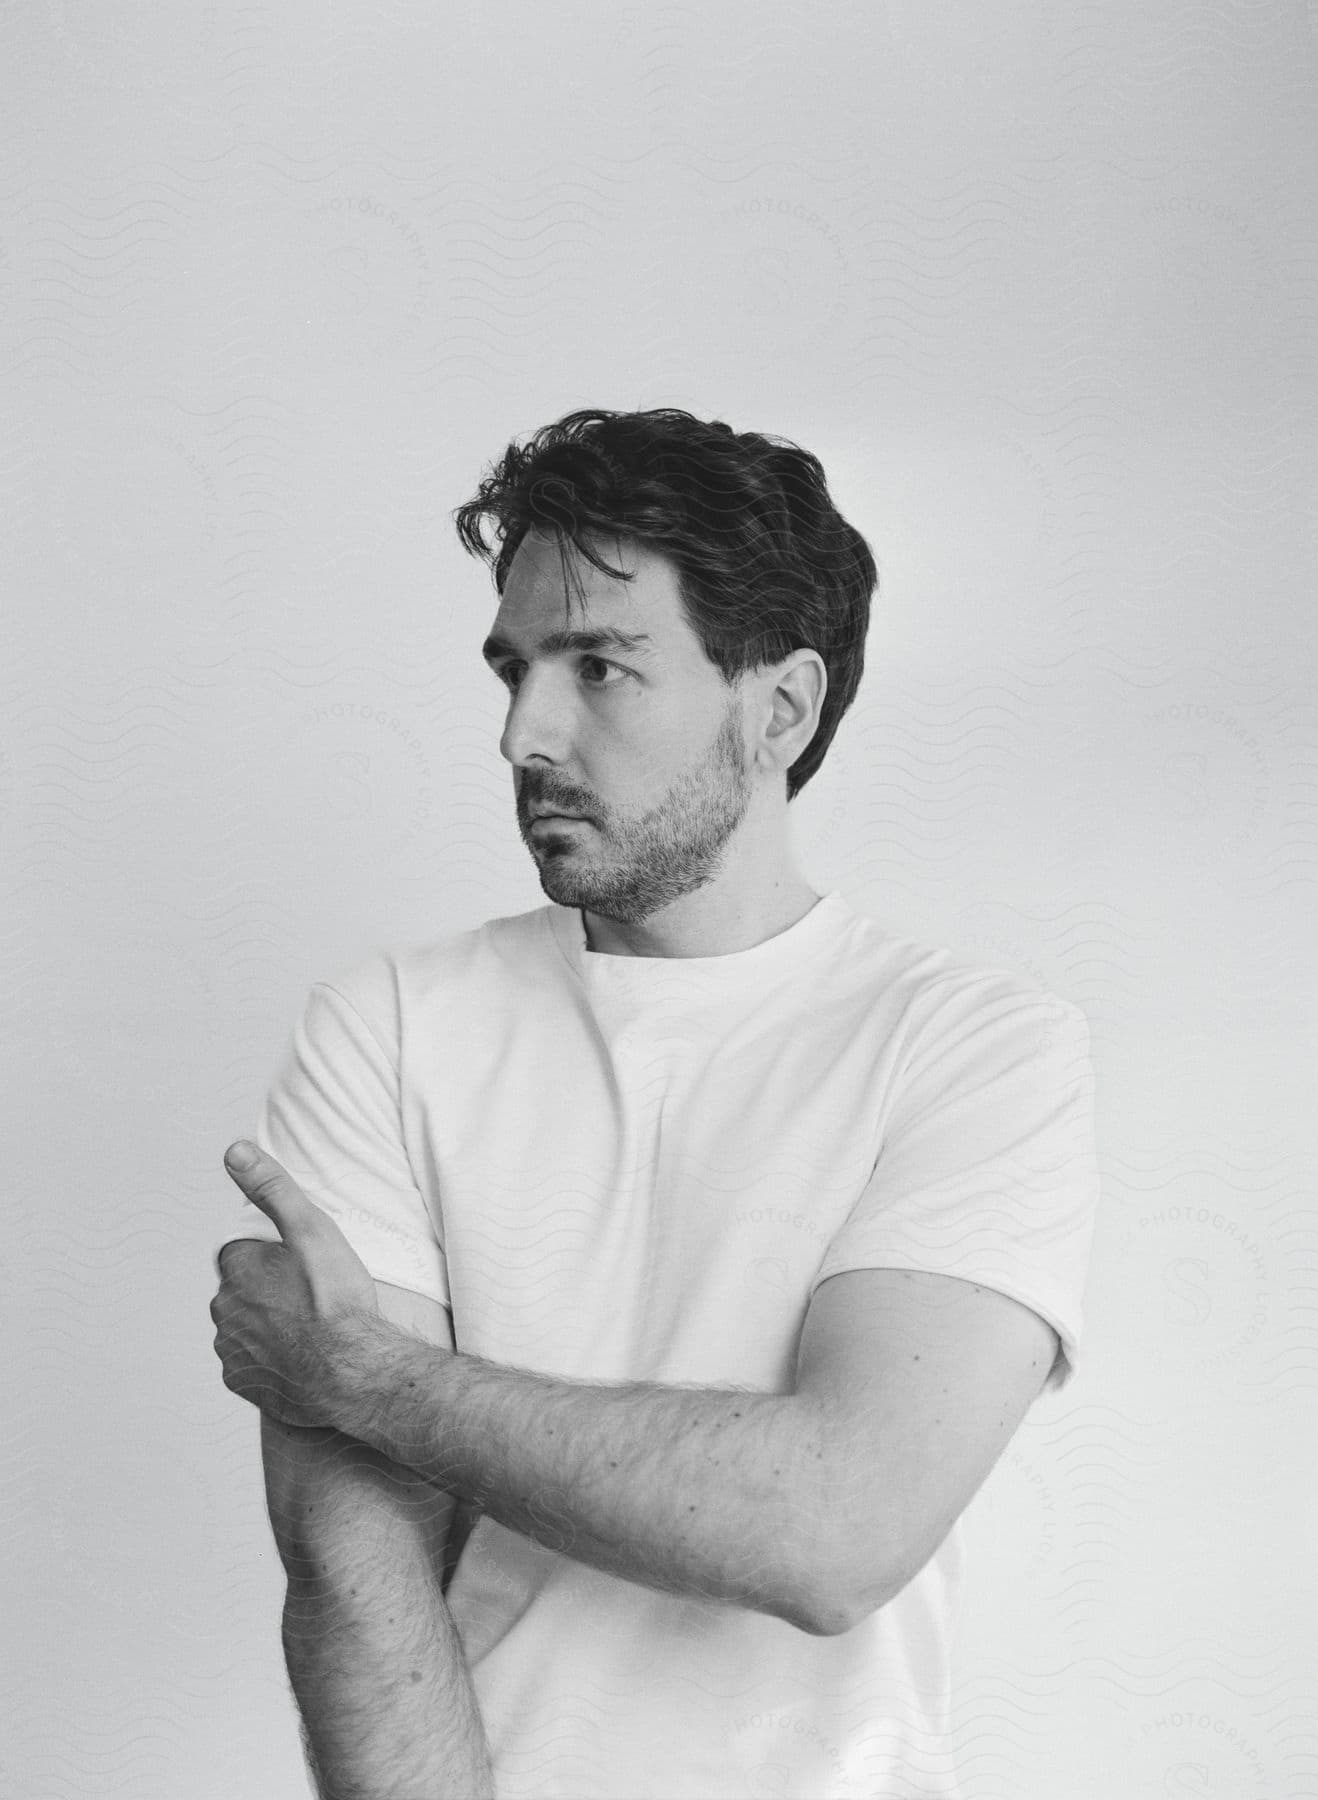 Bearded man looking to the side with one hand on his arm and wearing a white t-shirt indoors